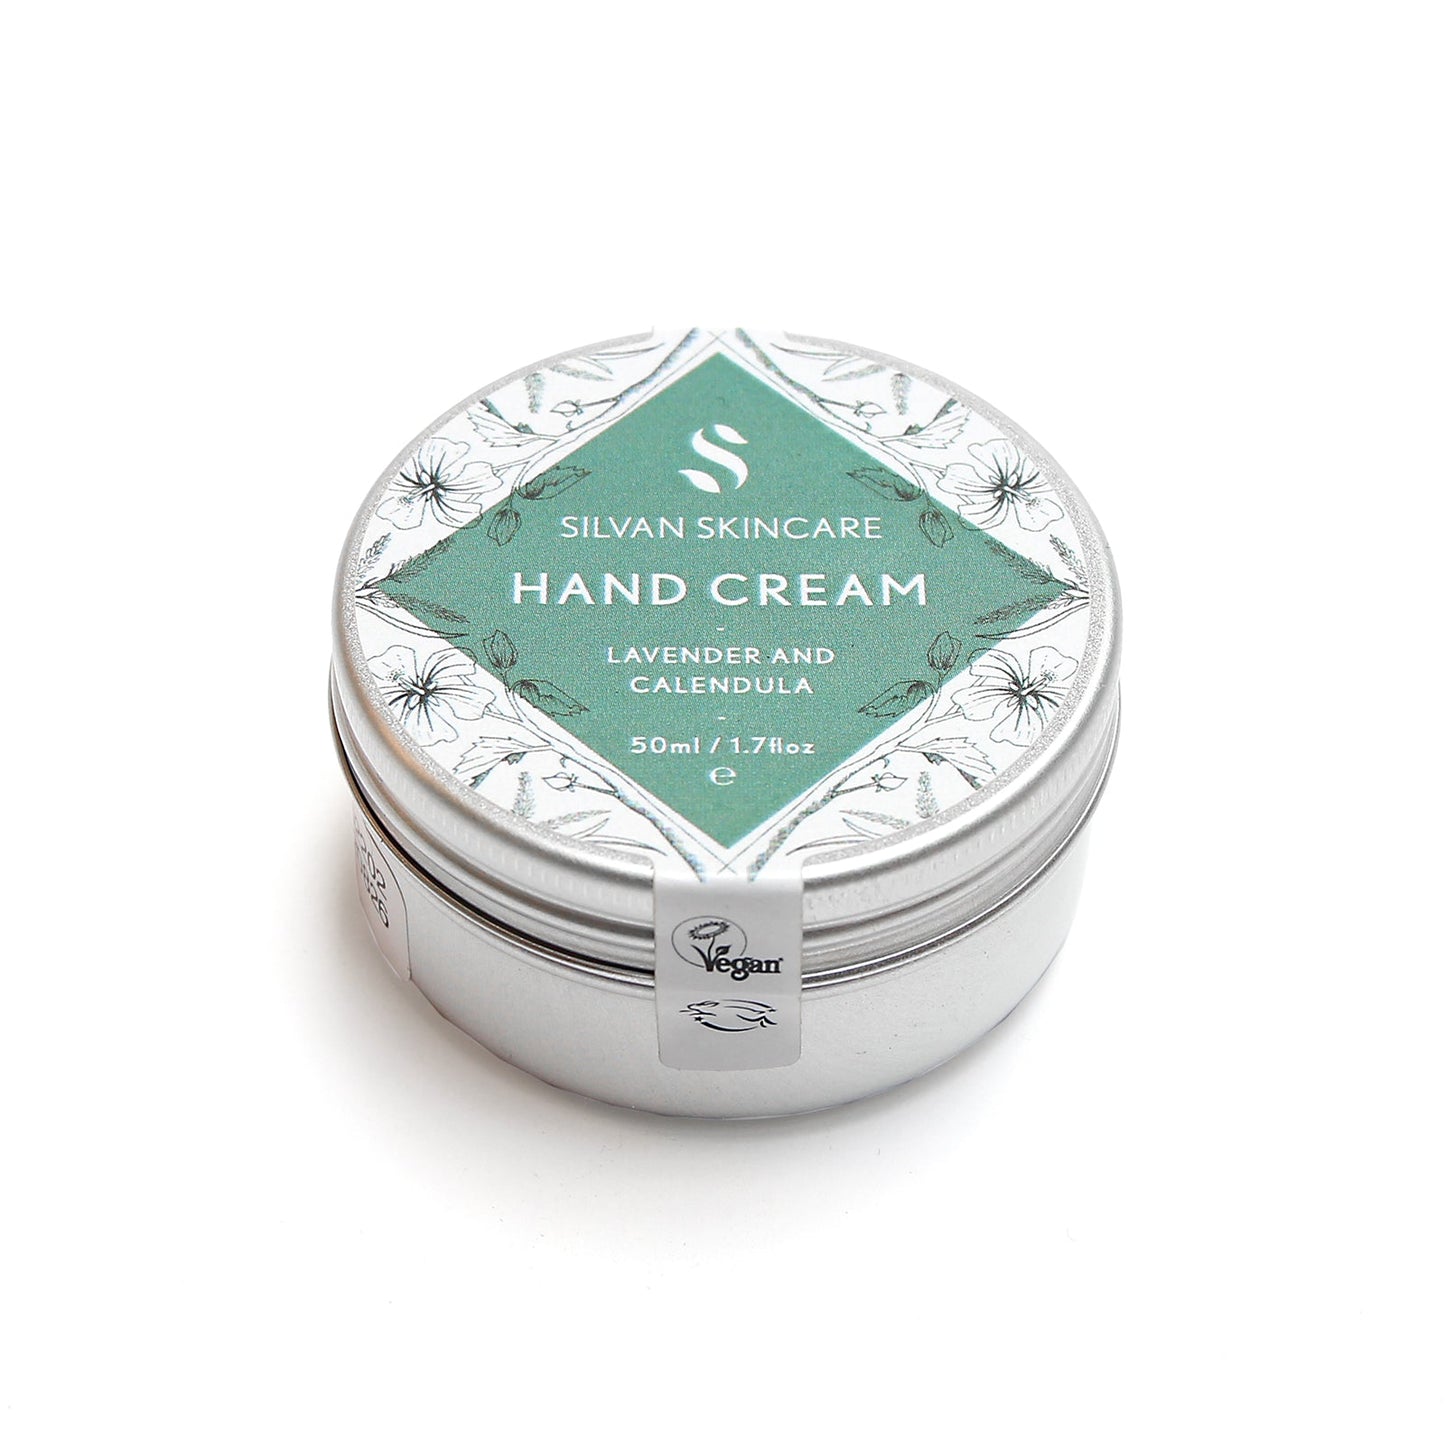 Lavender and calendula handcream photographed on a white background at a slight angle. the natural, vegan and cruelty free hand cream is shown in a silver coloured tin with a white and muted turquoise label on it that reads silvan skincare hand cream lavender and calendula